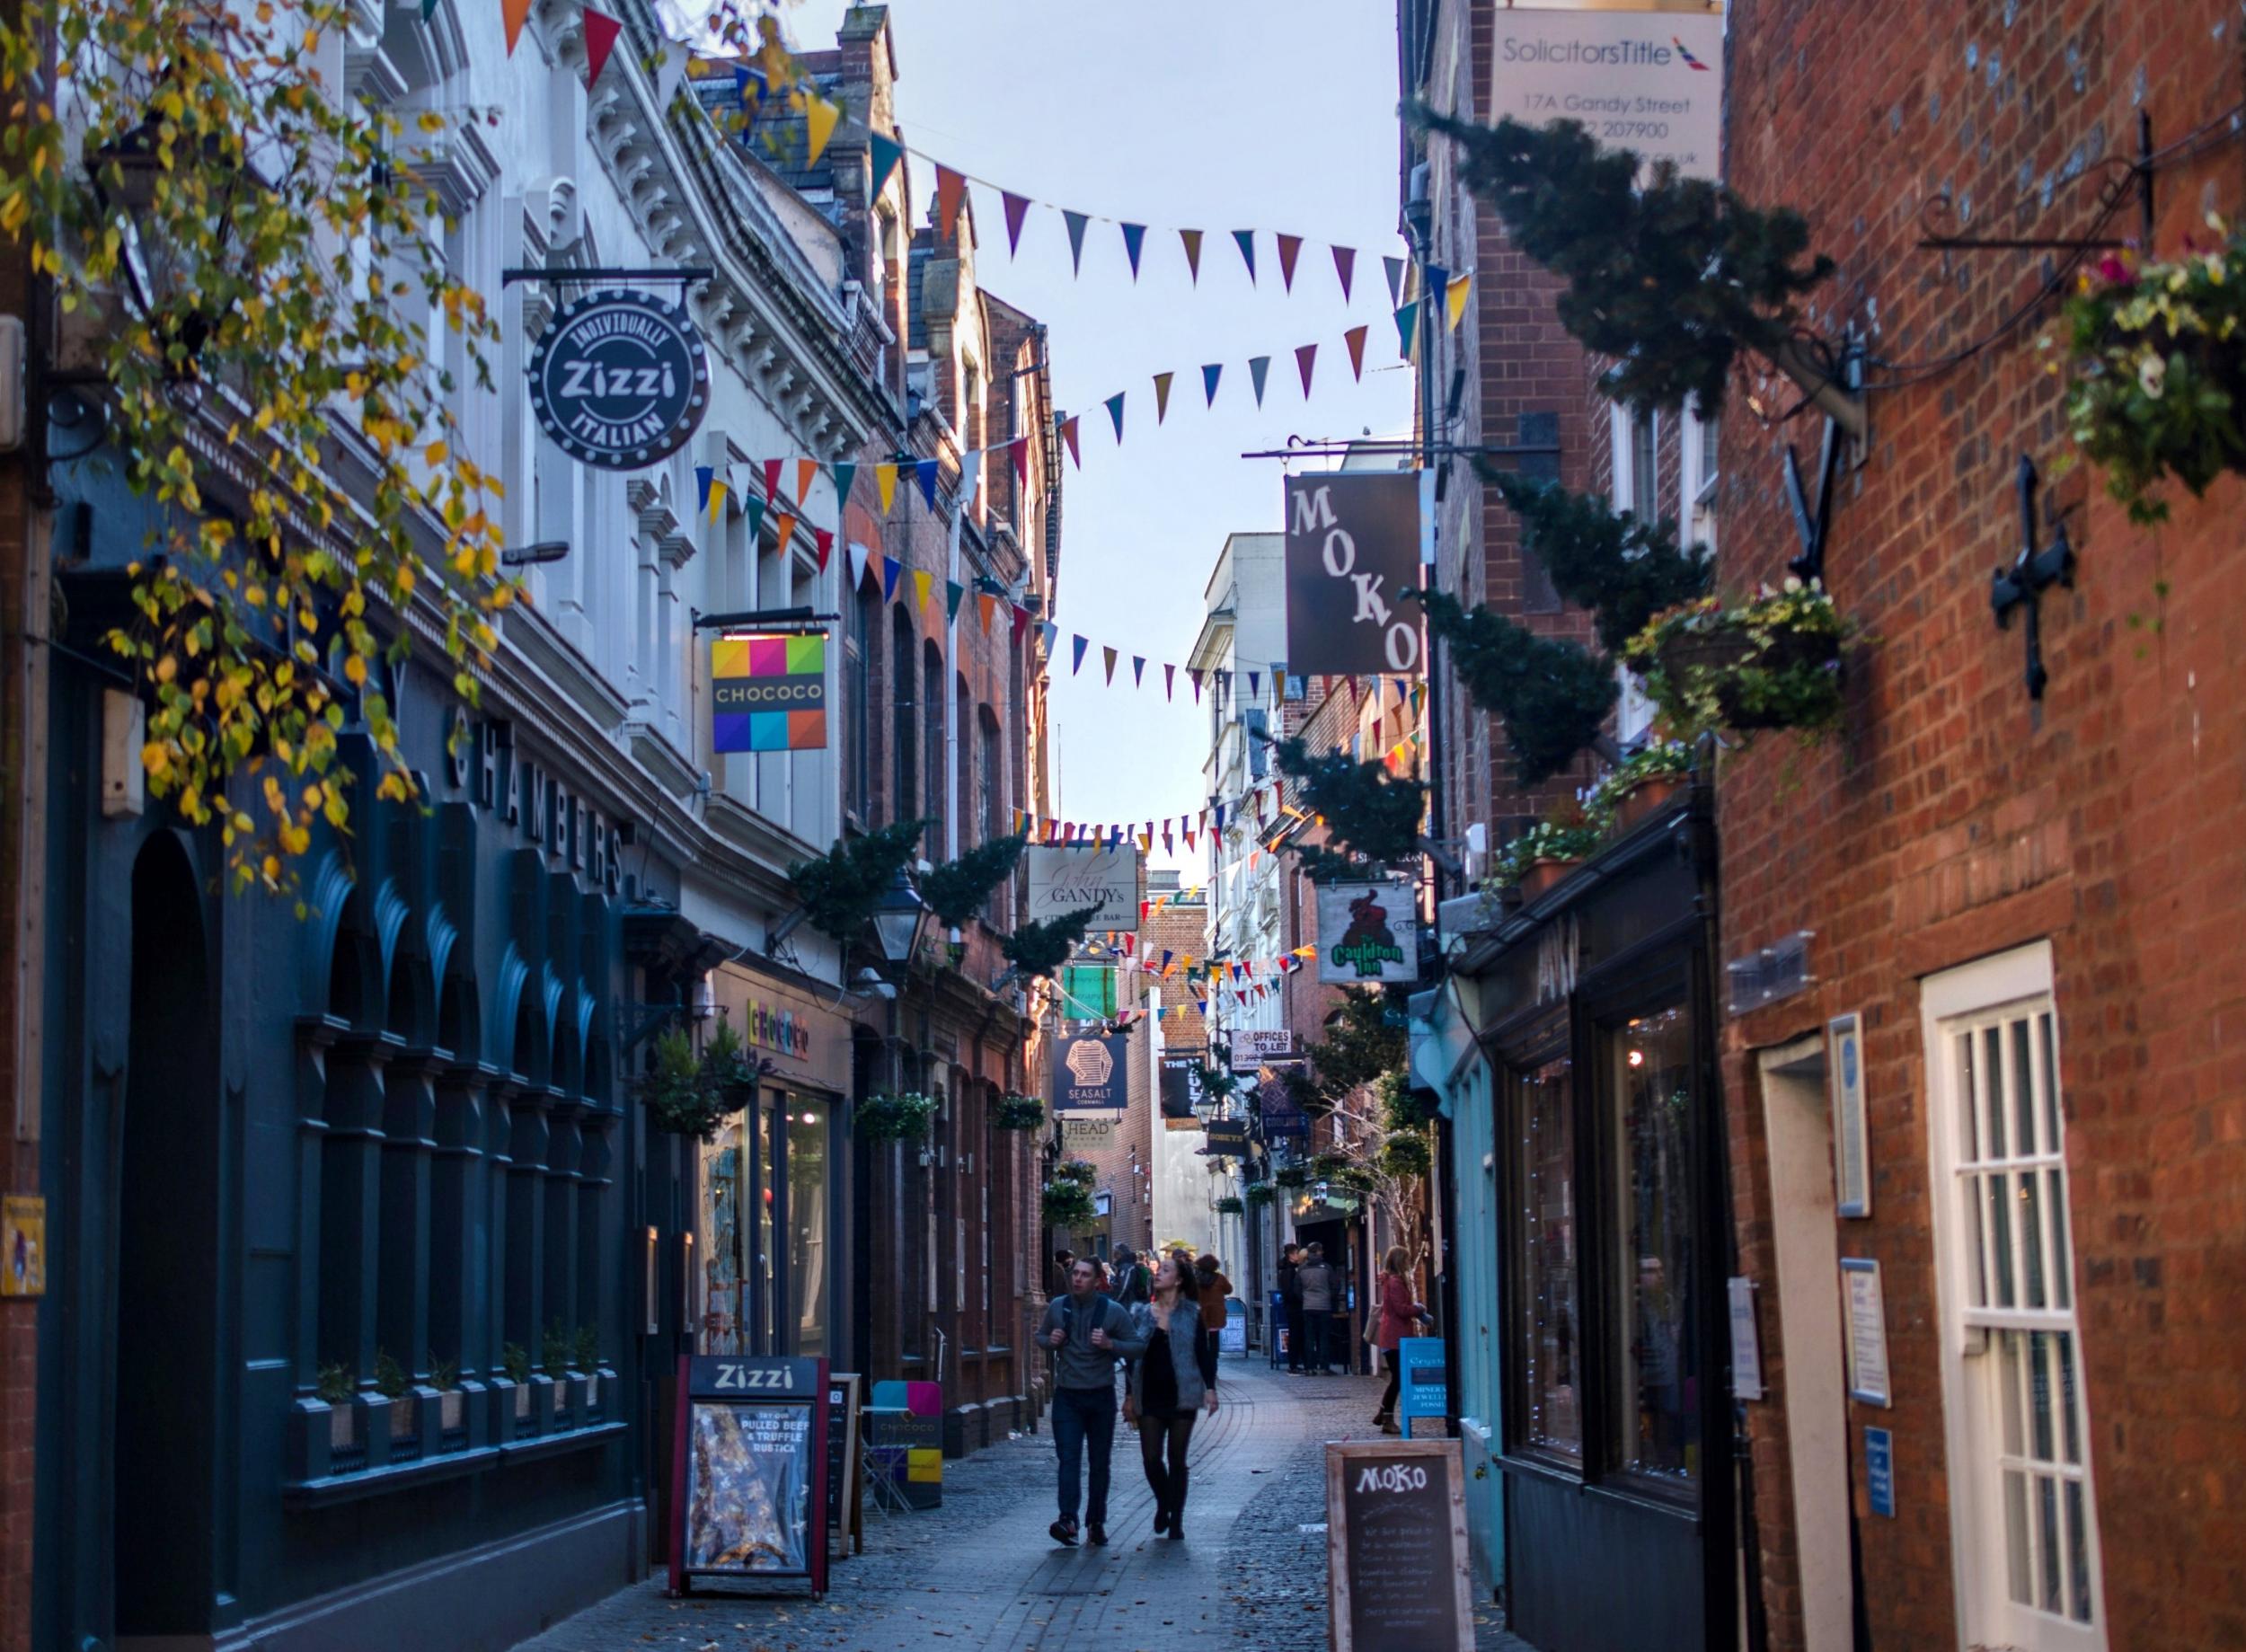 Gandy Street is rumoured to have been the inspiration behind Diagon Alley